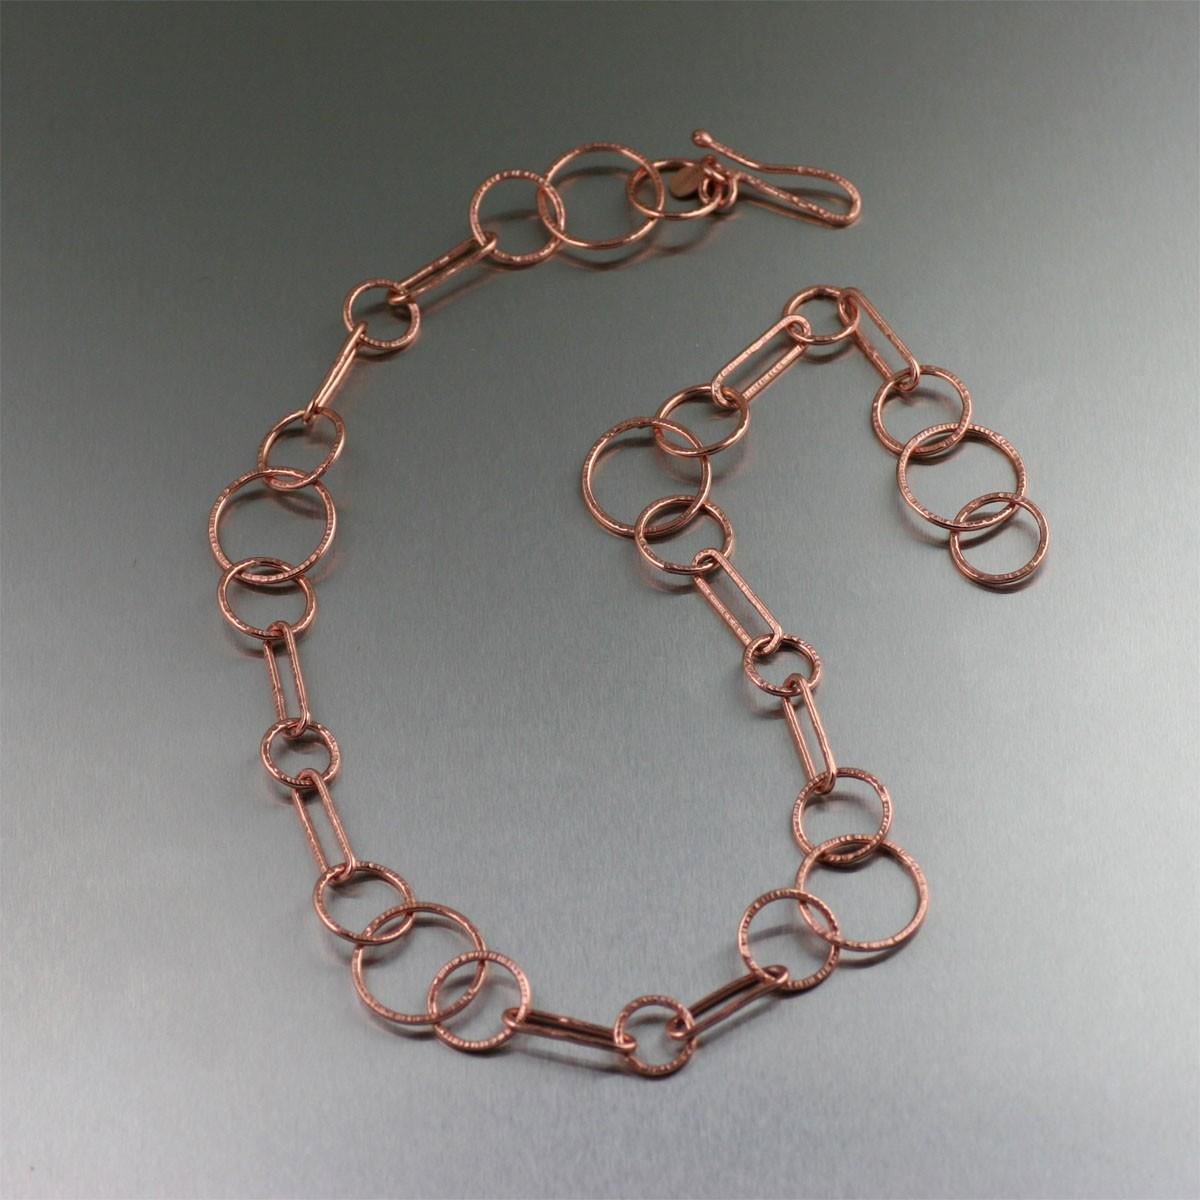 Superb Copper Chain Necklaces Featured by #ILoveCopperJewelry #CopperAnniversary #Artisan ilovecopperjewelry.com/jewelry/neckla…